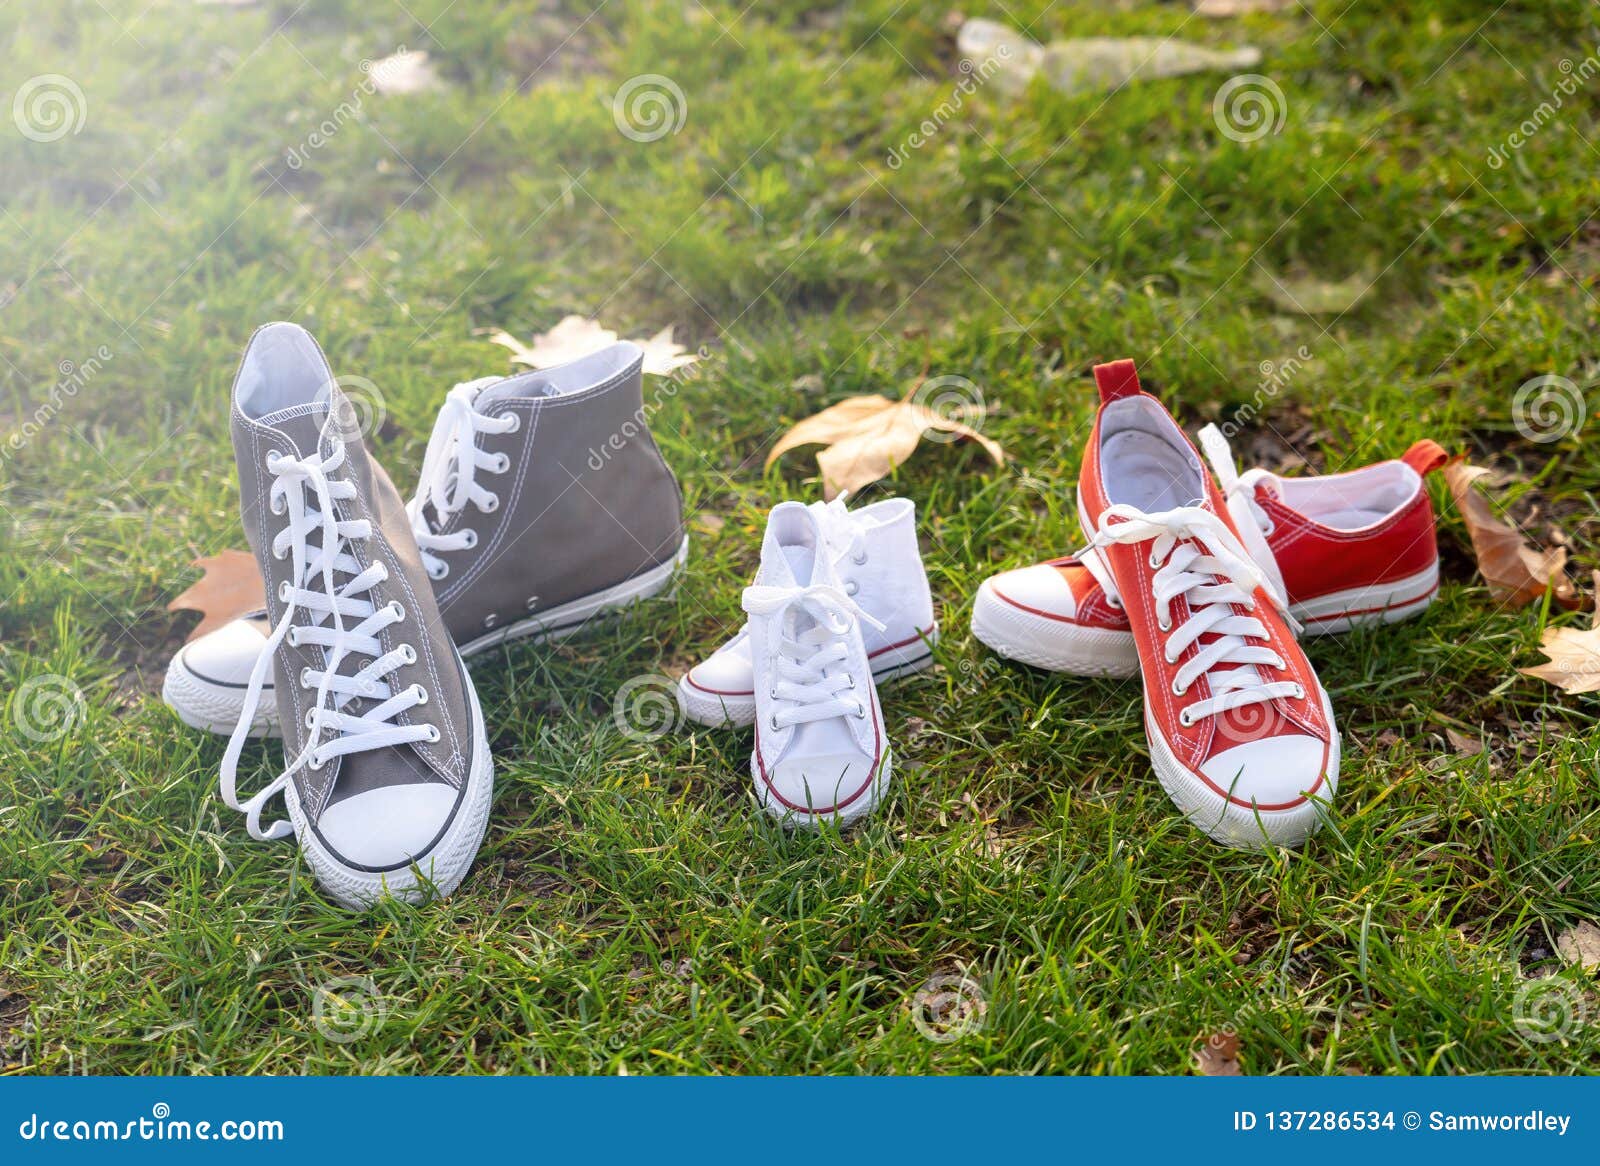 Autumn Image of Family Shoes Sneakers Gumshoes on Grass in Sunset Light ...